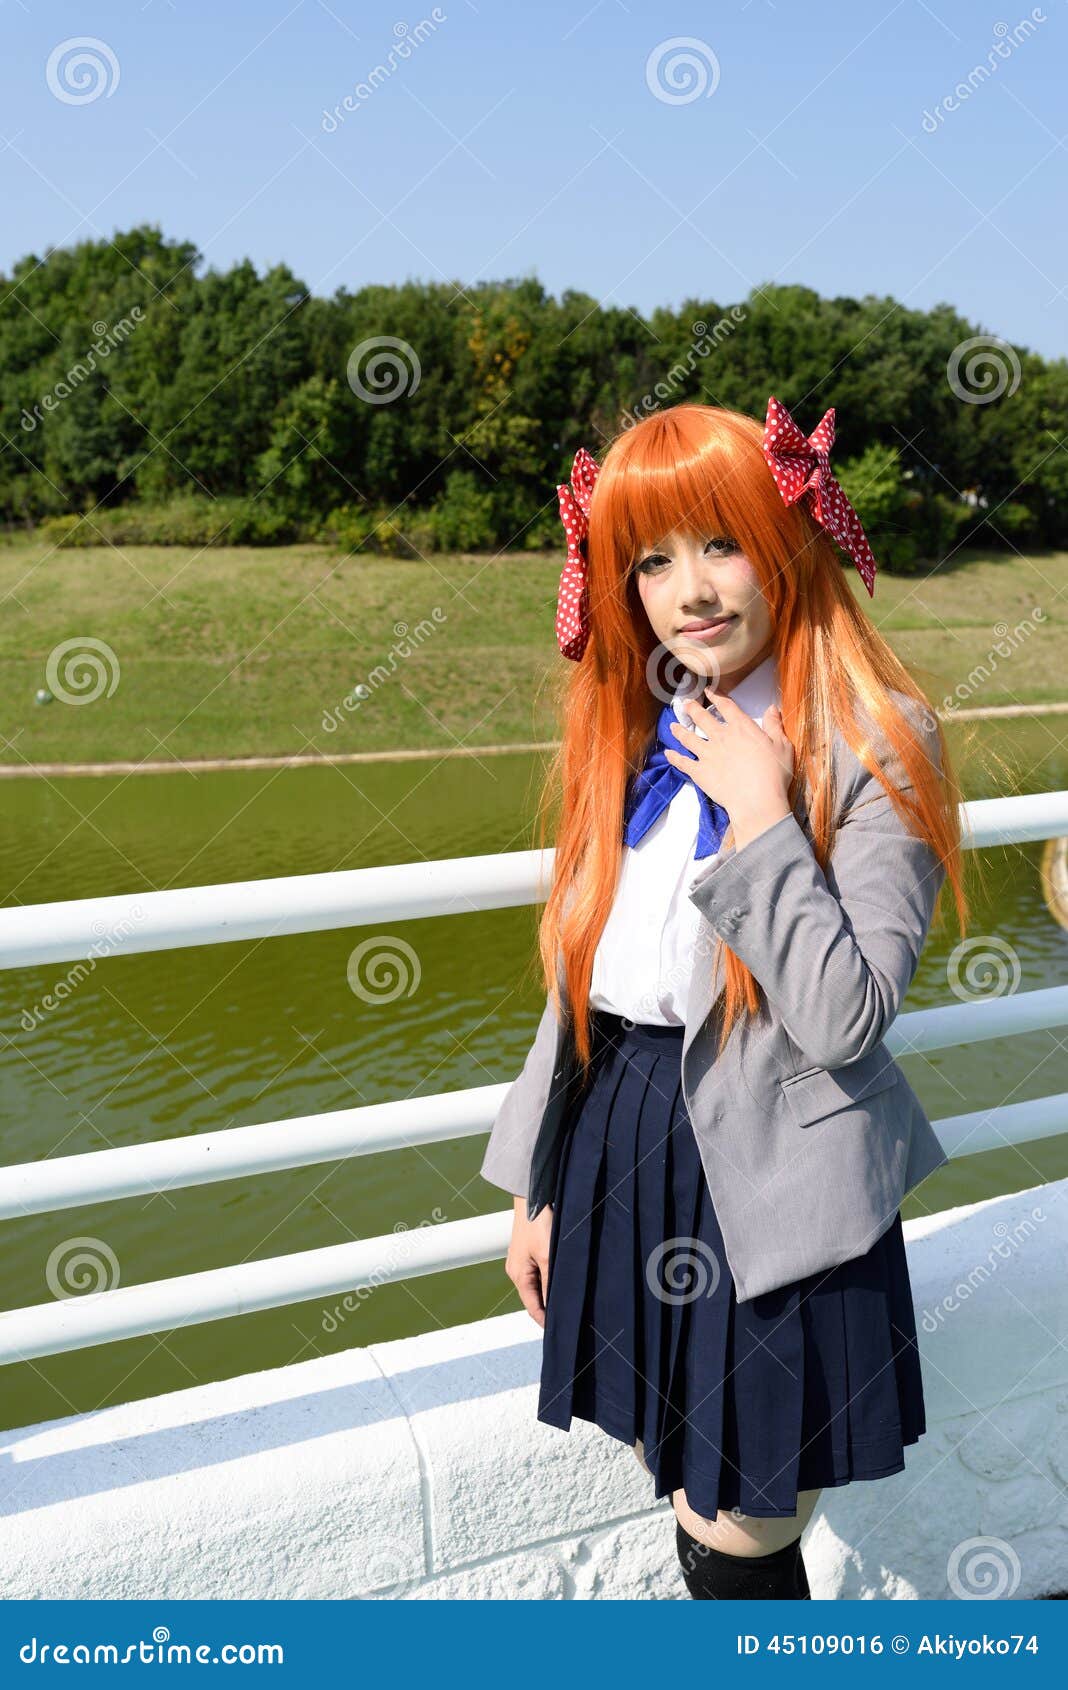 Japanese Anime Character Cosplay Girl Editorial Photo